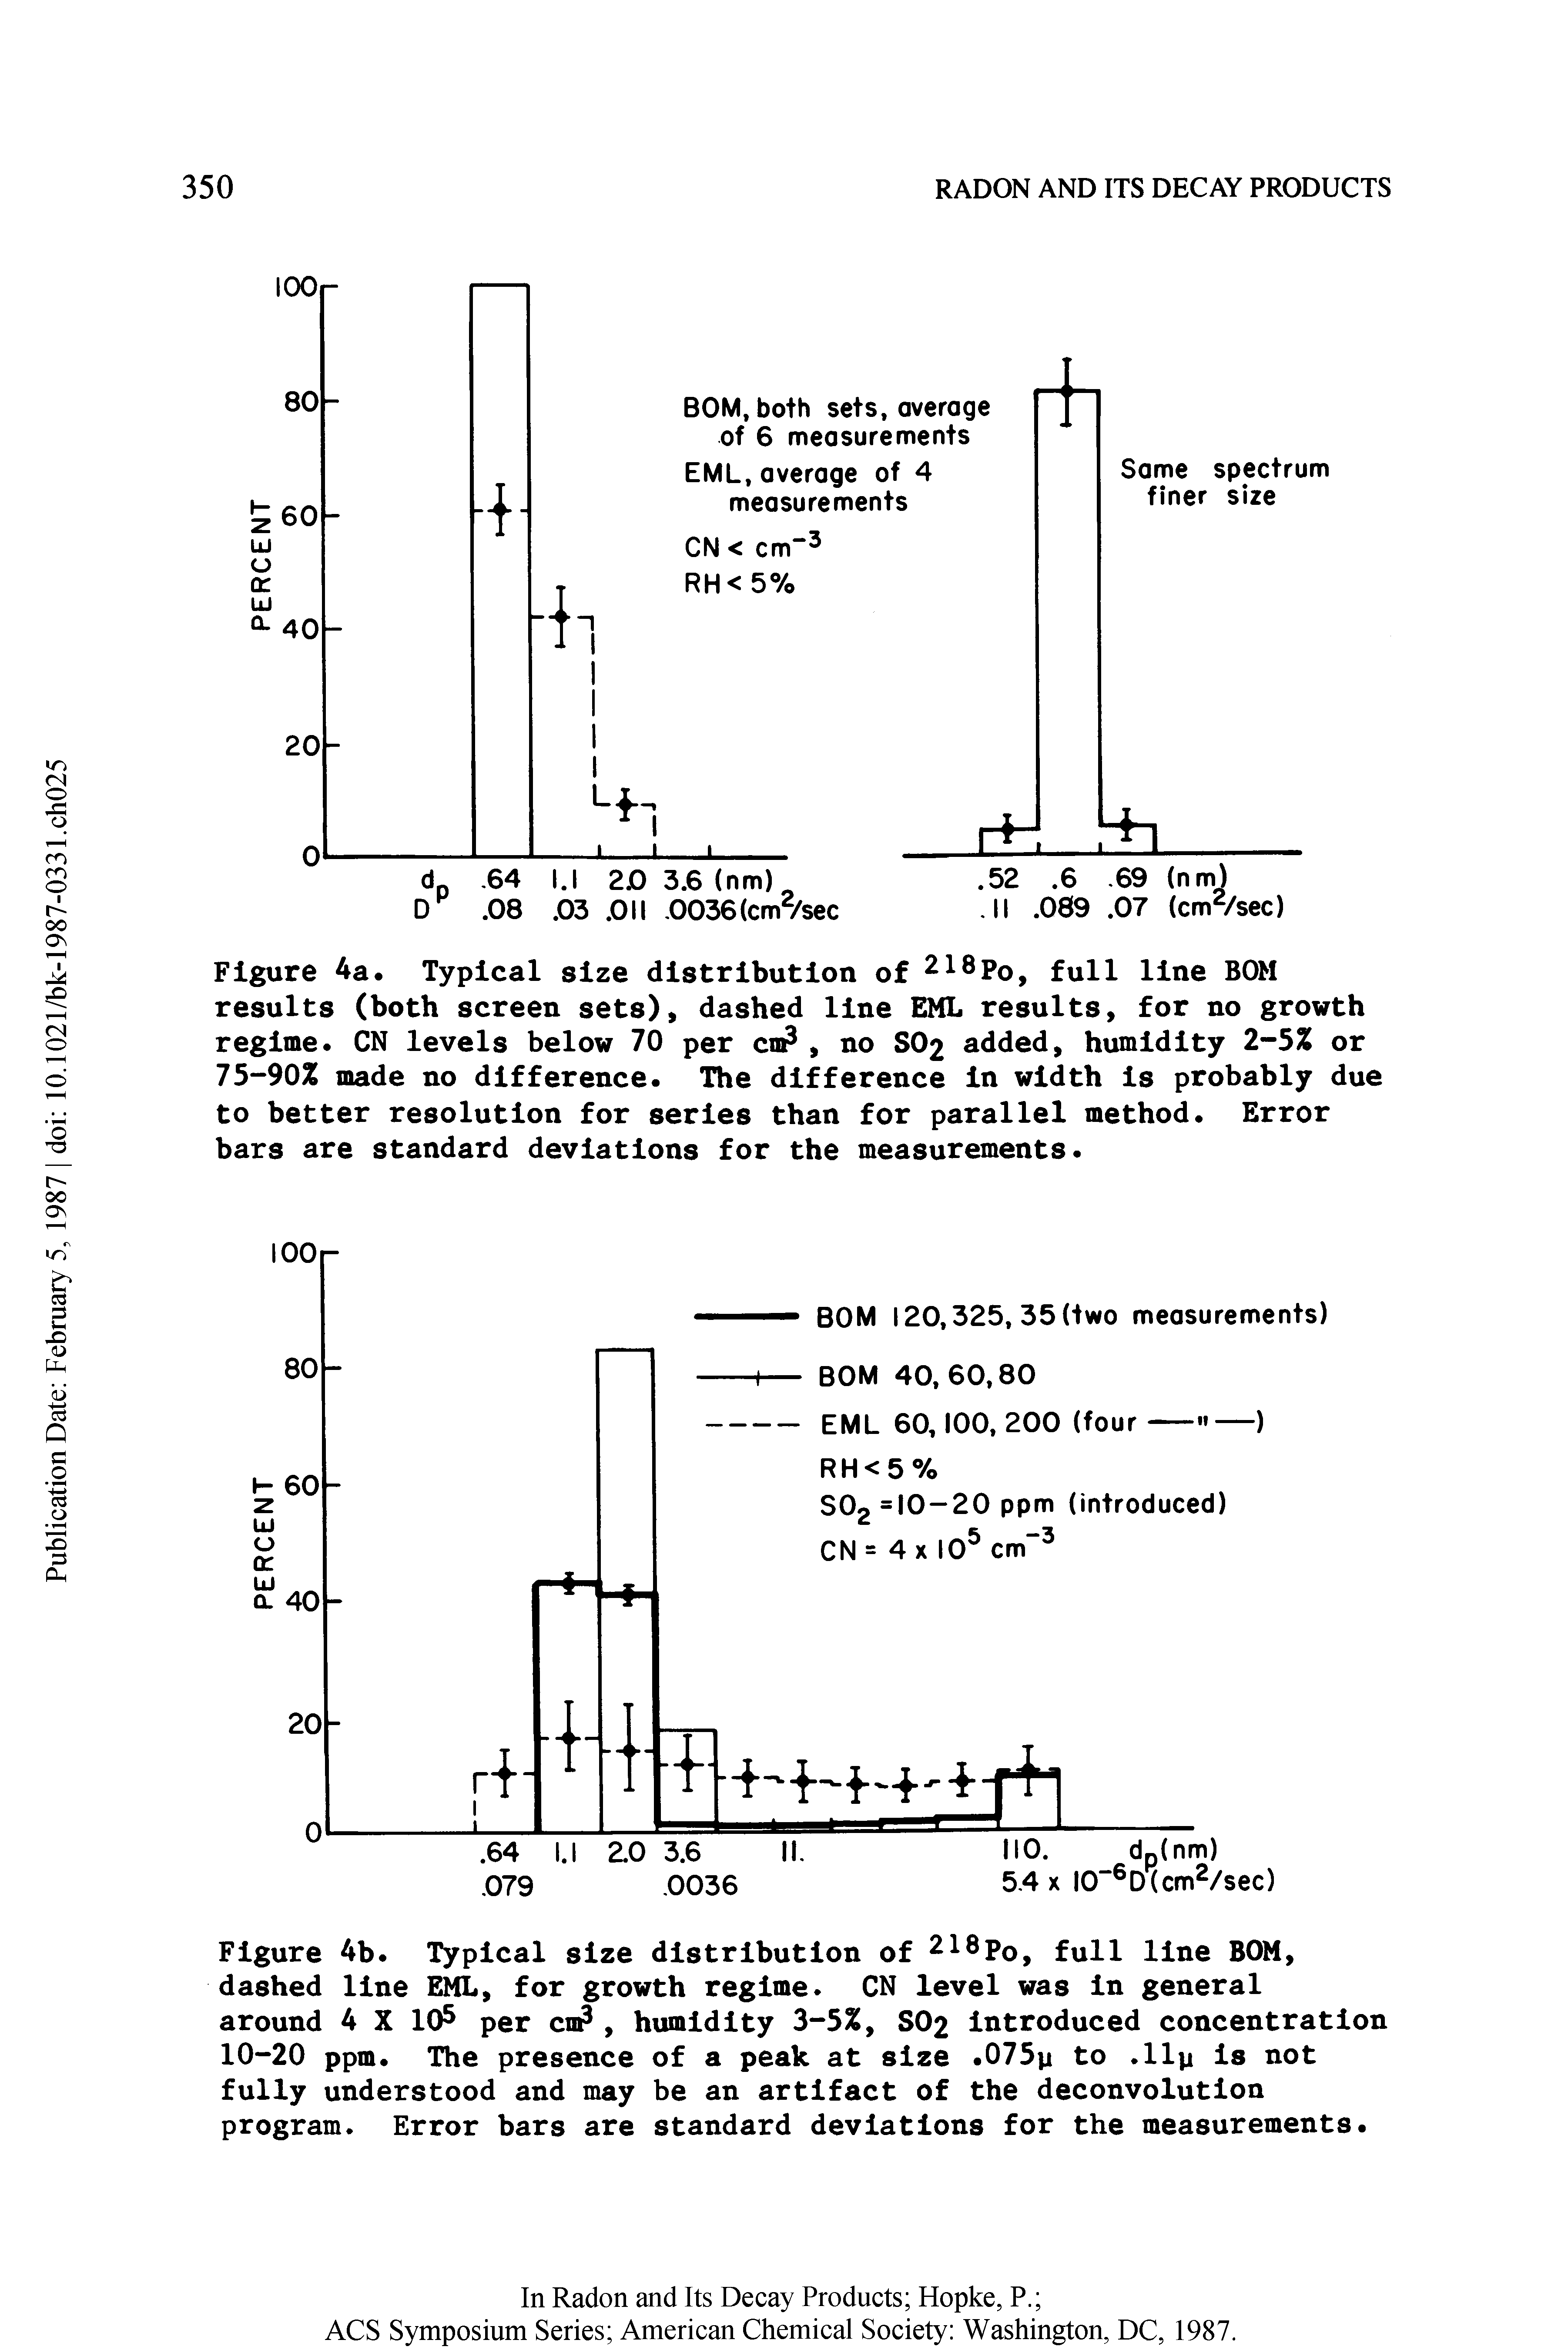 Figure 4a. Typical size distribution of 21 Po, full line BOM results (both screen sets), dashed line EML results, for no growth regime. CN levels below 70 per cm , no SO2 added, humidity 2-5% or 75-90% made no difference. The difference in width is probably due to better resolution for series than for parallel method. Error bars are standard deviations for the measurements.